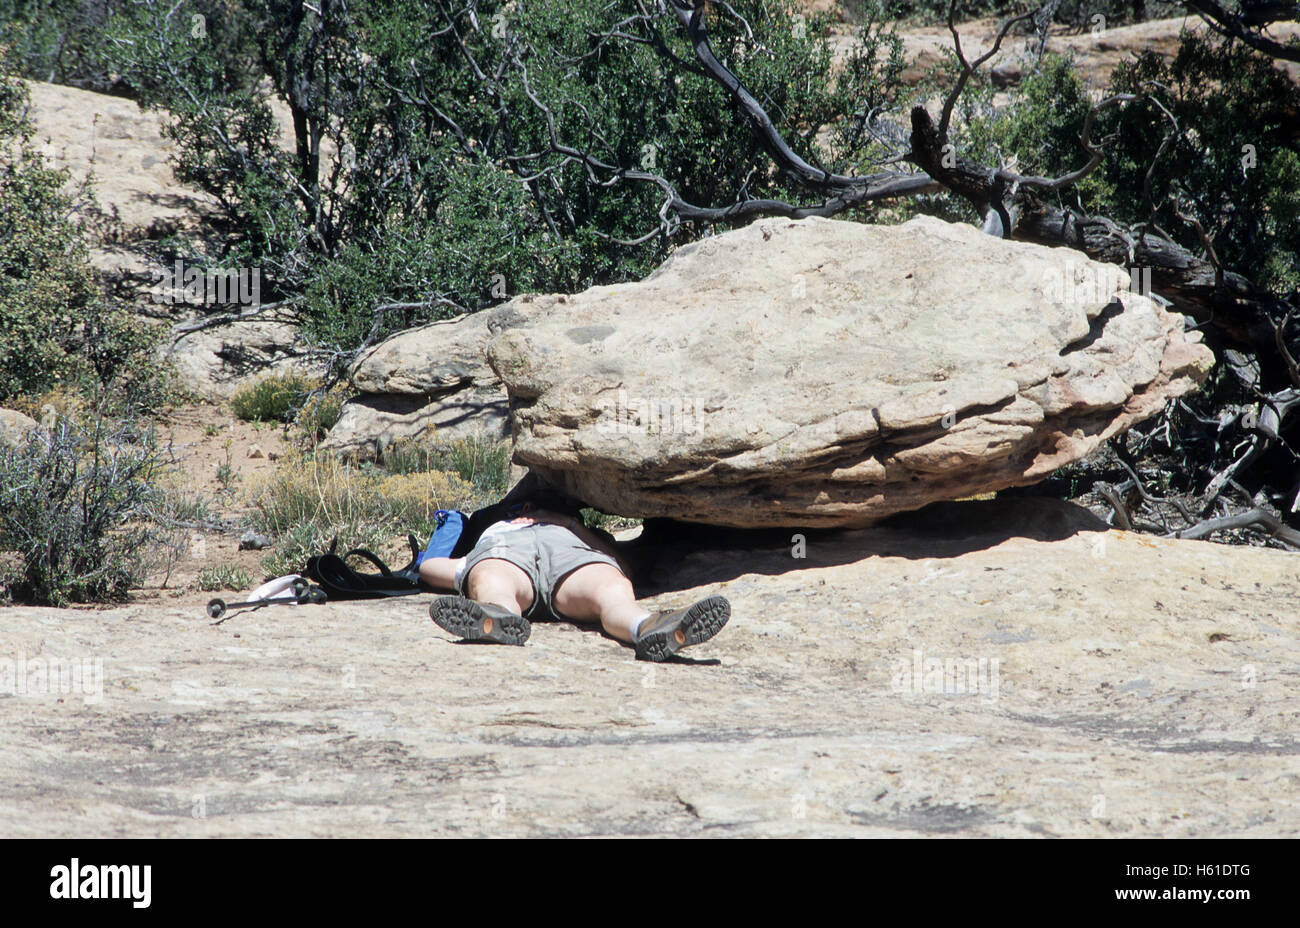 Exhausted hiker seeks shade and rest in Canyon de Chelly National Monument, Arizona Stock Photo